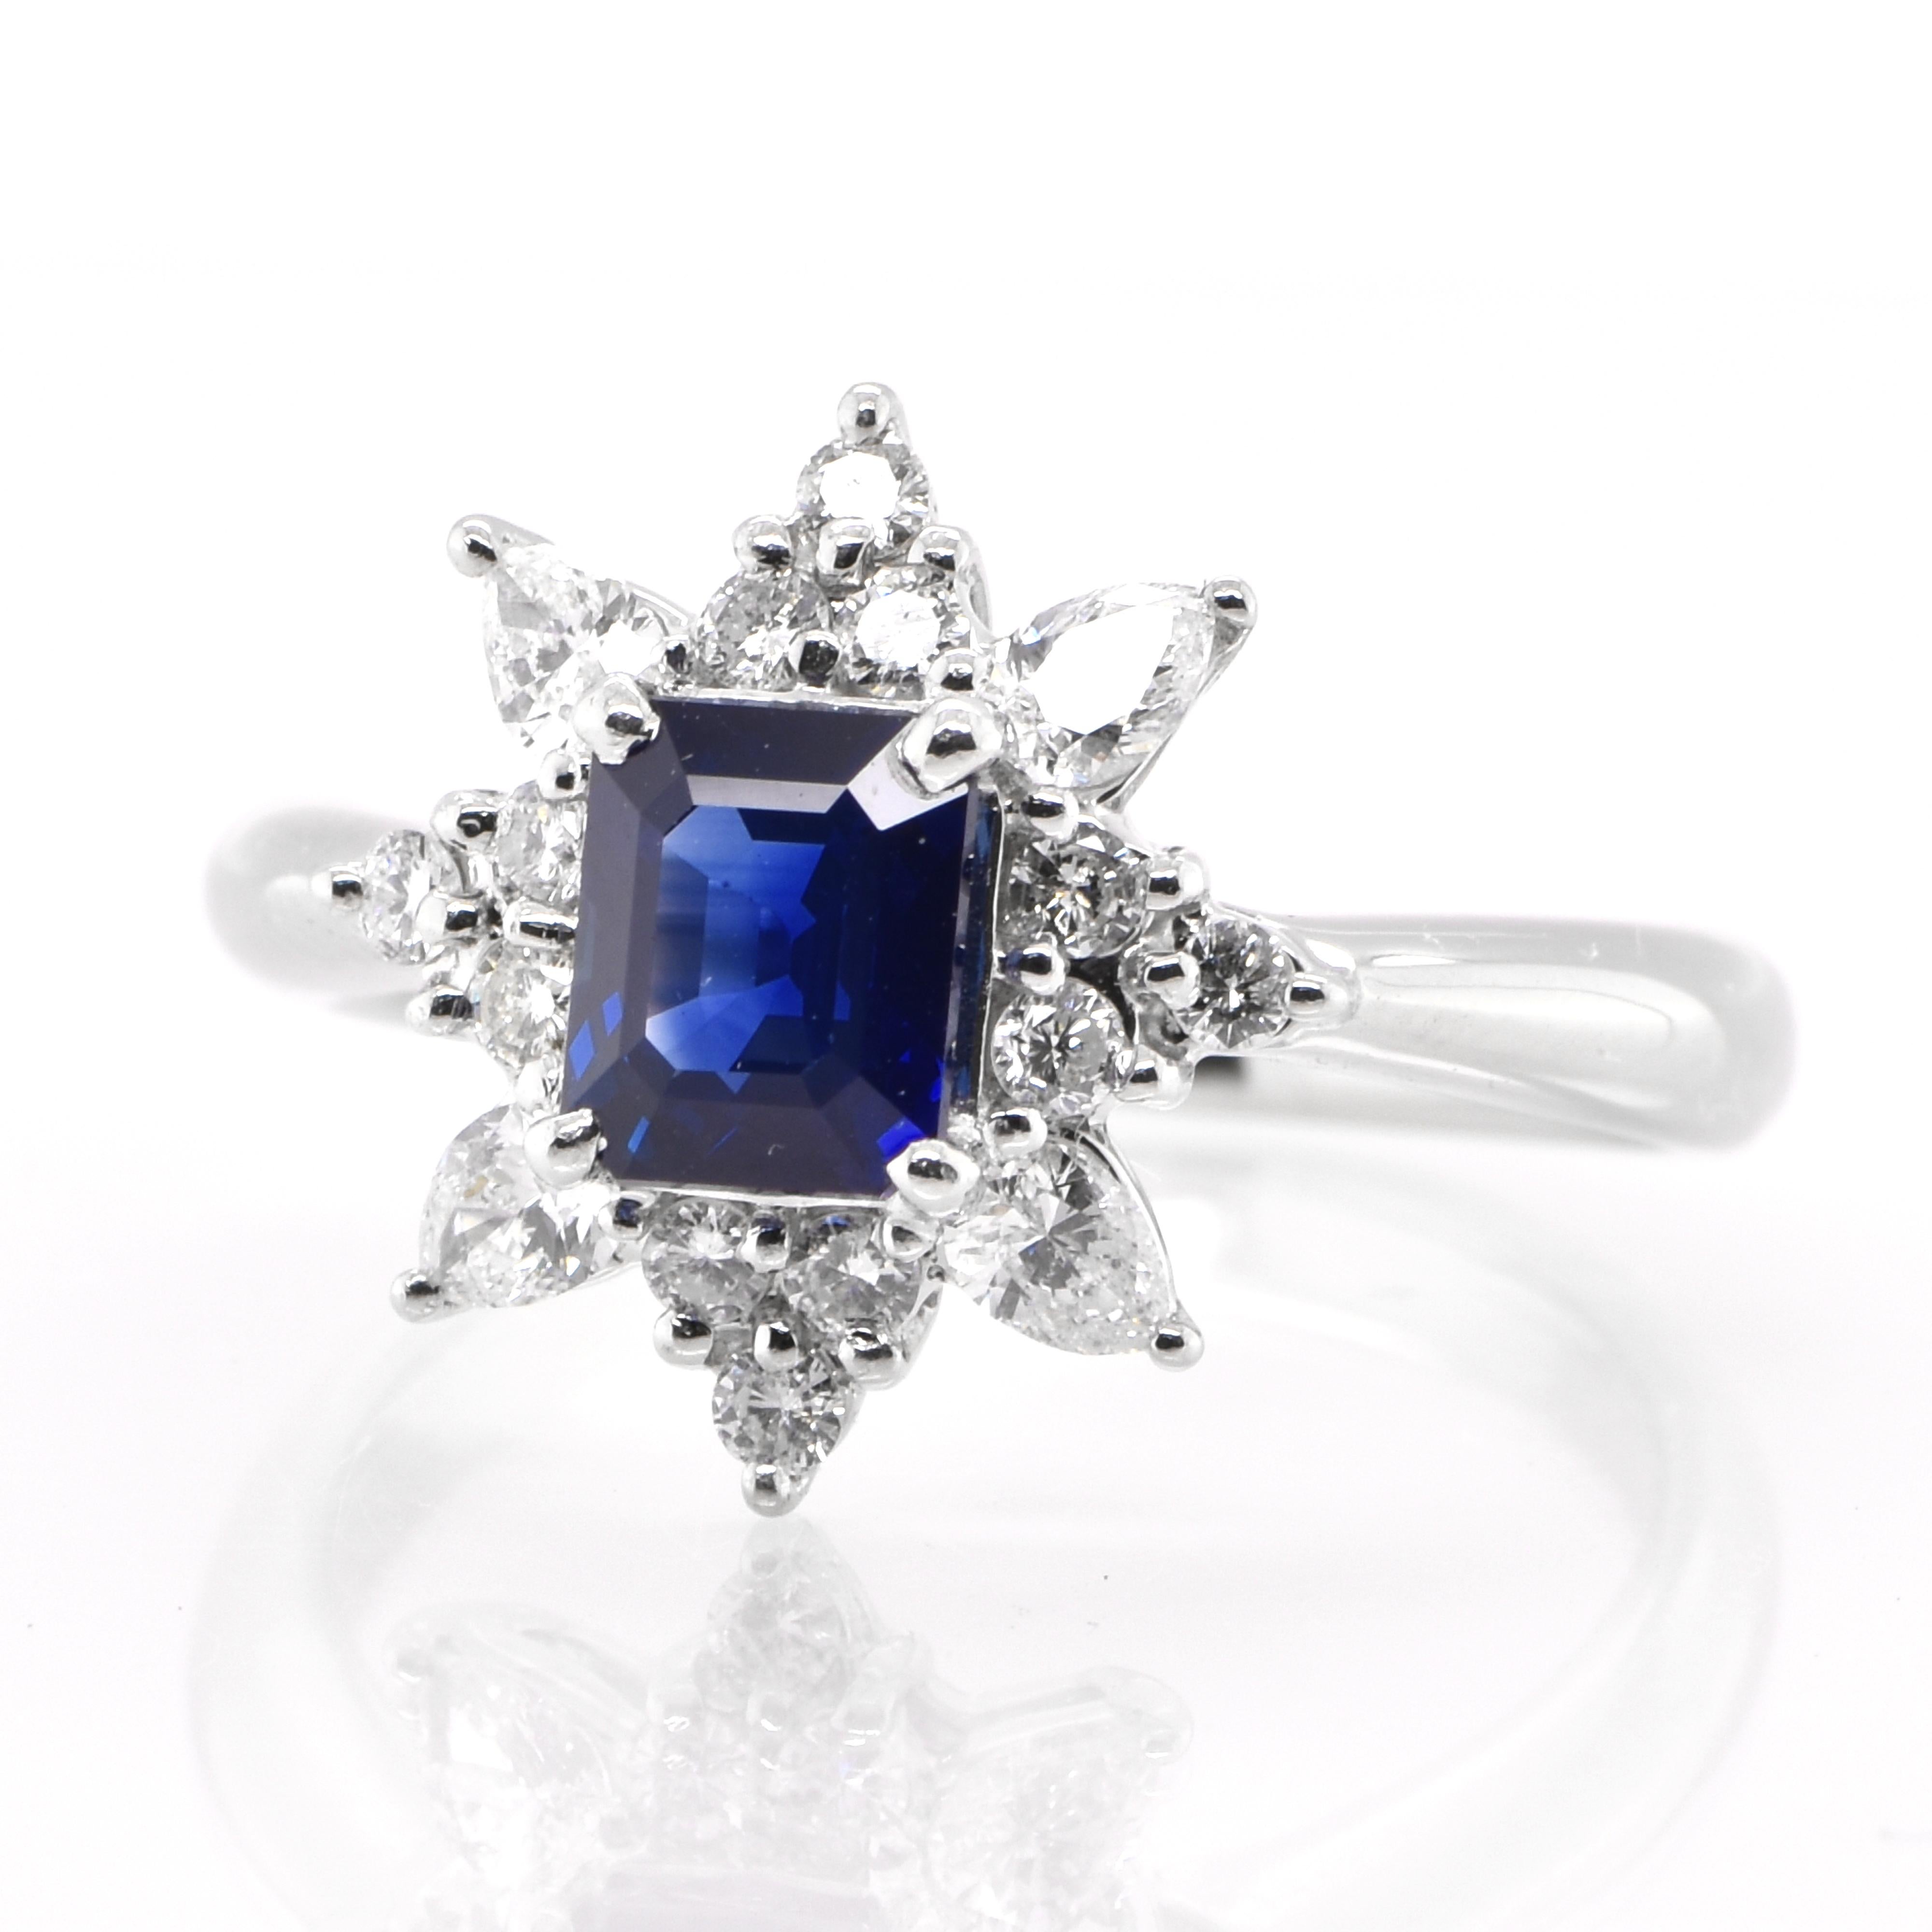 A beautiful Halo Ring featuring a 1.23 Carat Natural Emerald-cut Sapphire and 0.53 Carats Diamond Accents set in Platinum. Sapphires have extraordinary durability - they excel in hardness as well as toughness and durability making them very popular